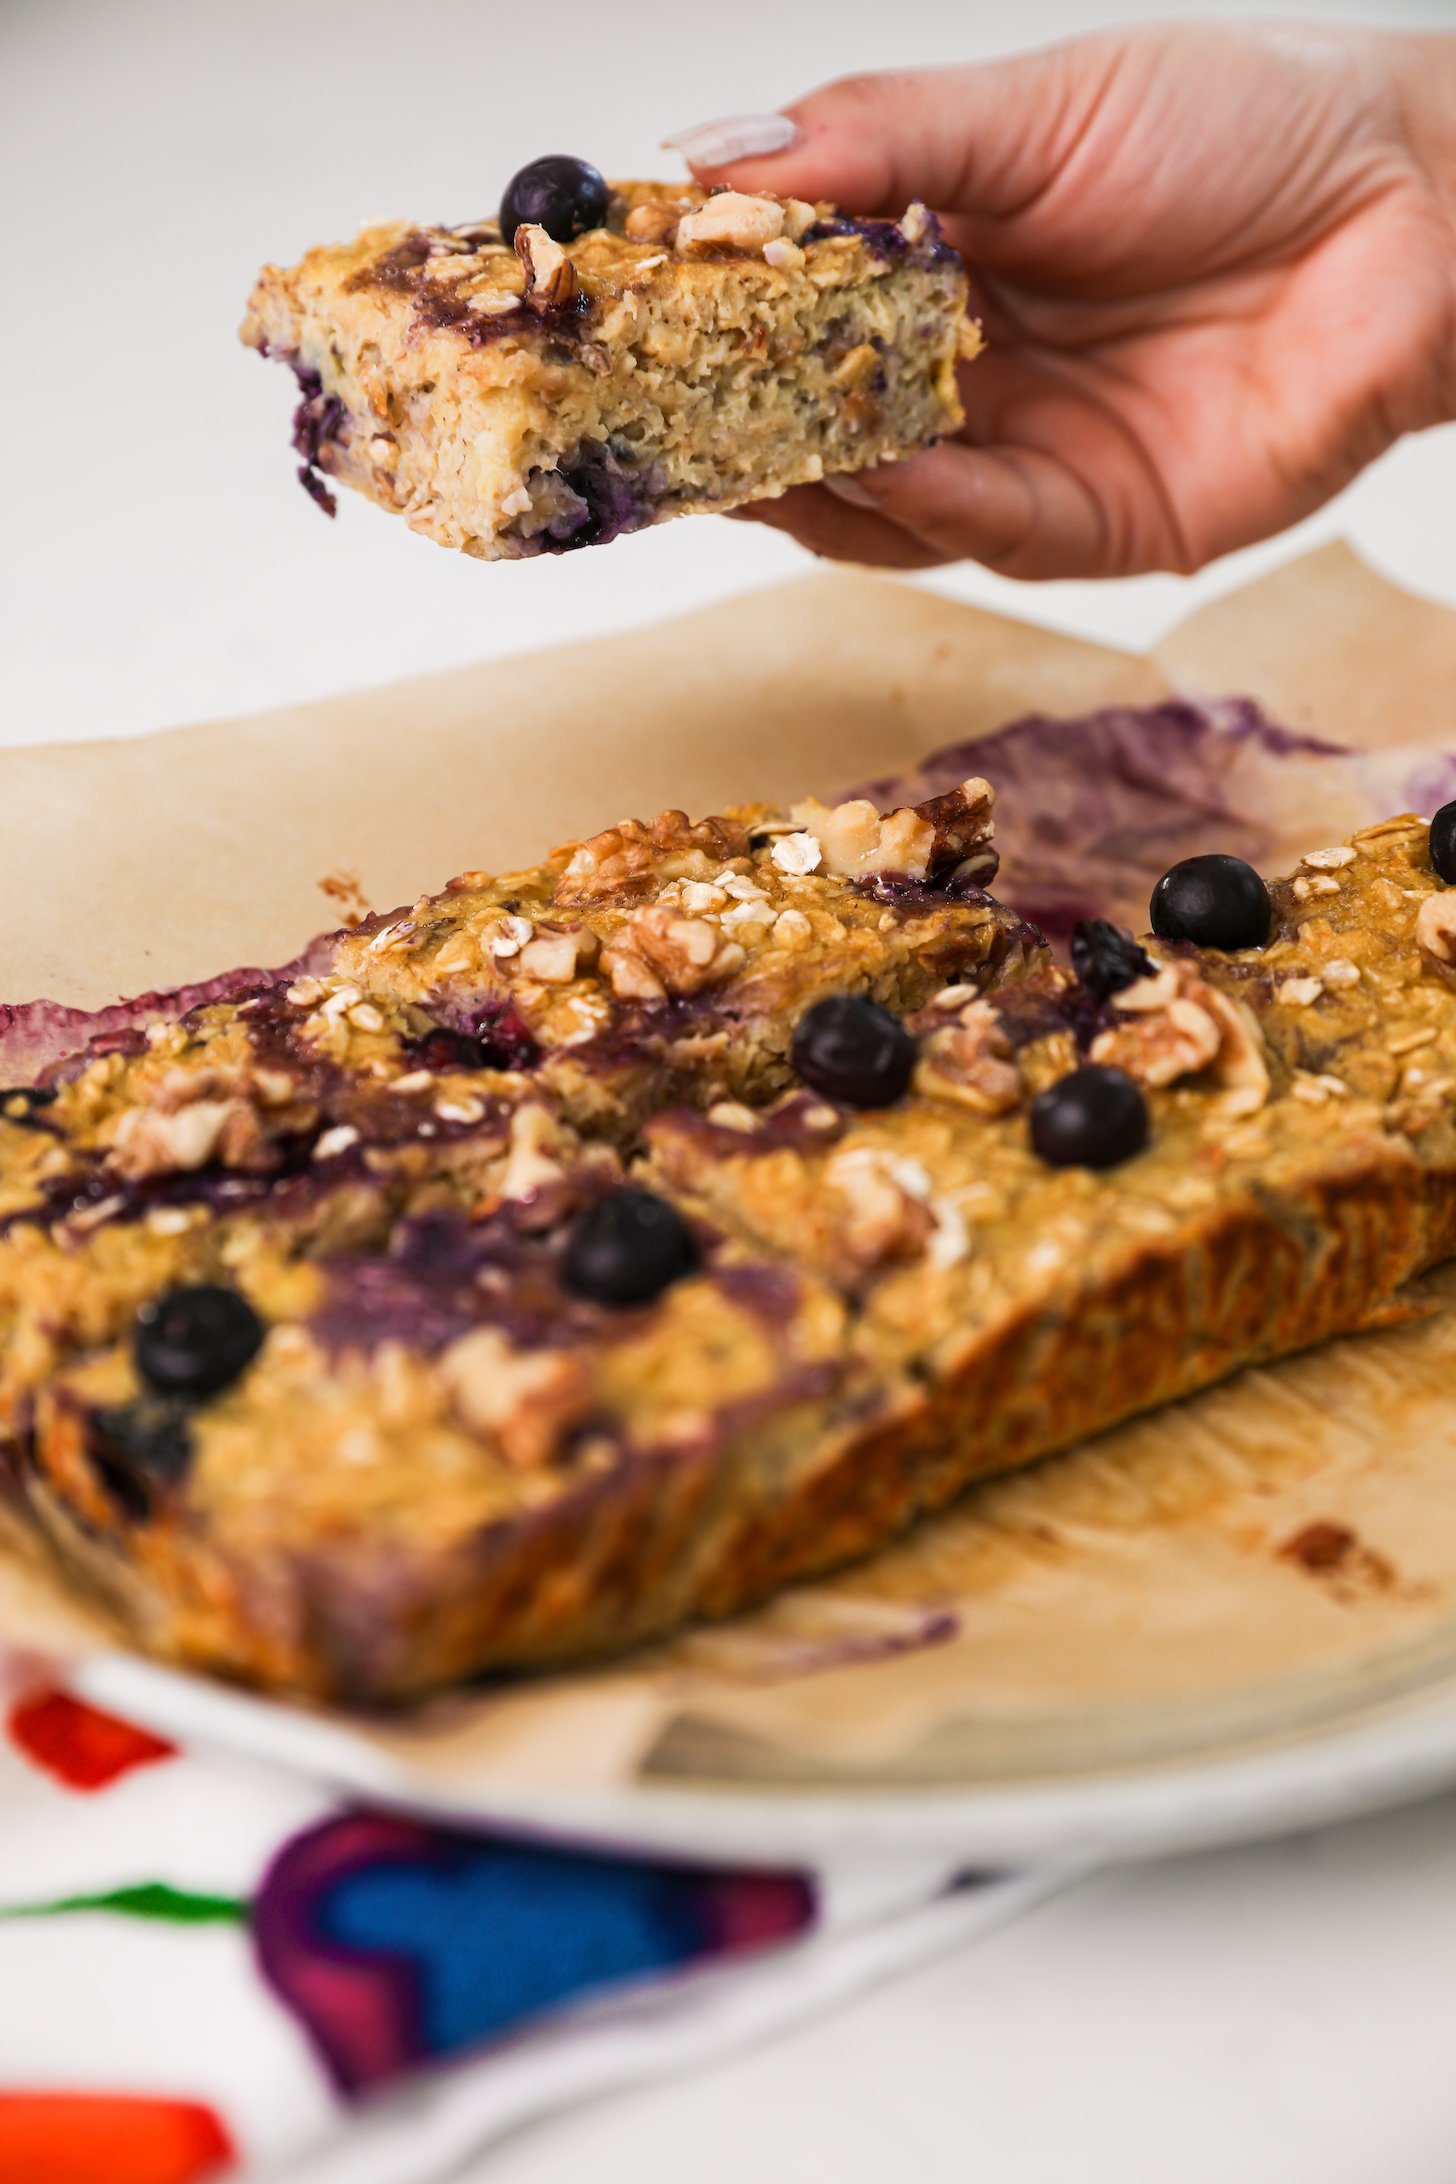 Hand holding a baked oatmeal bar over a plate with five more squares topped with blueberries.